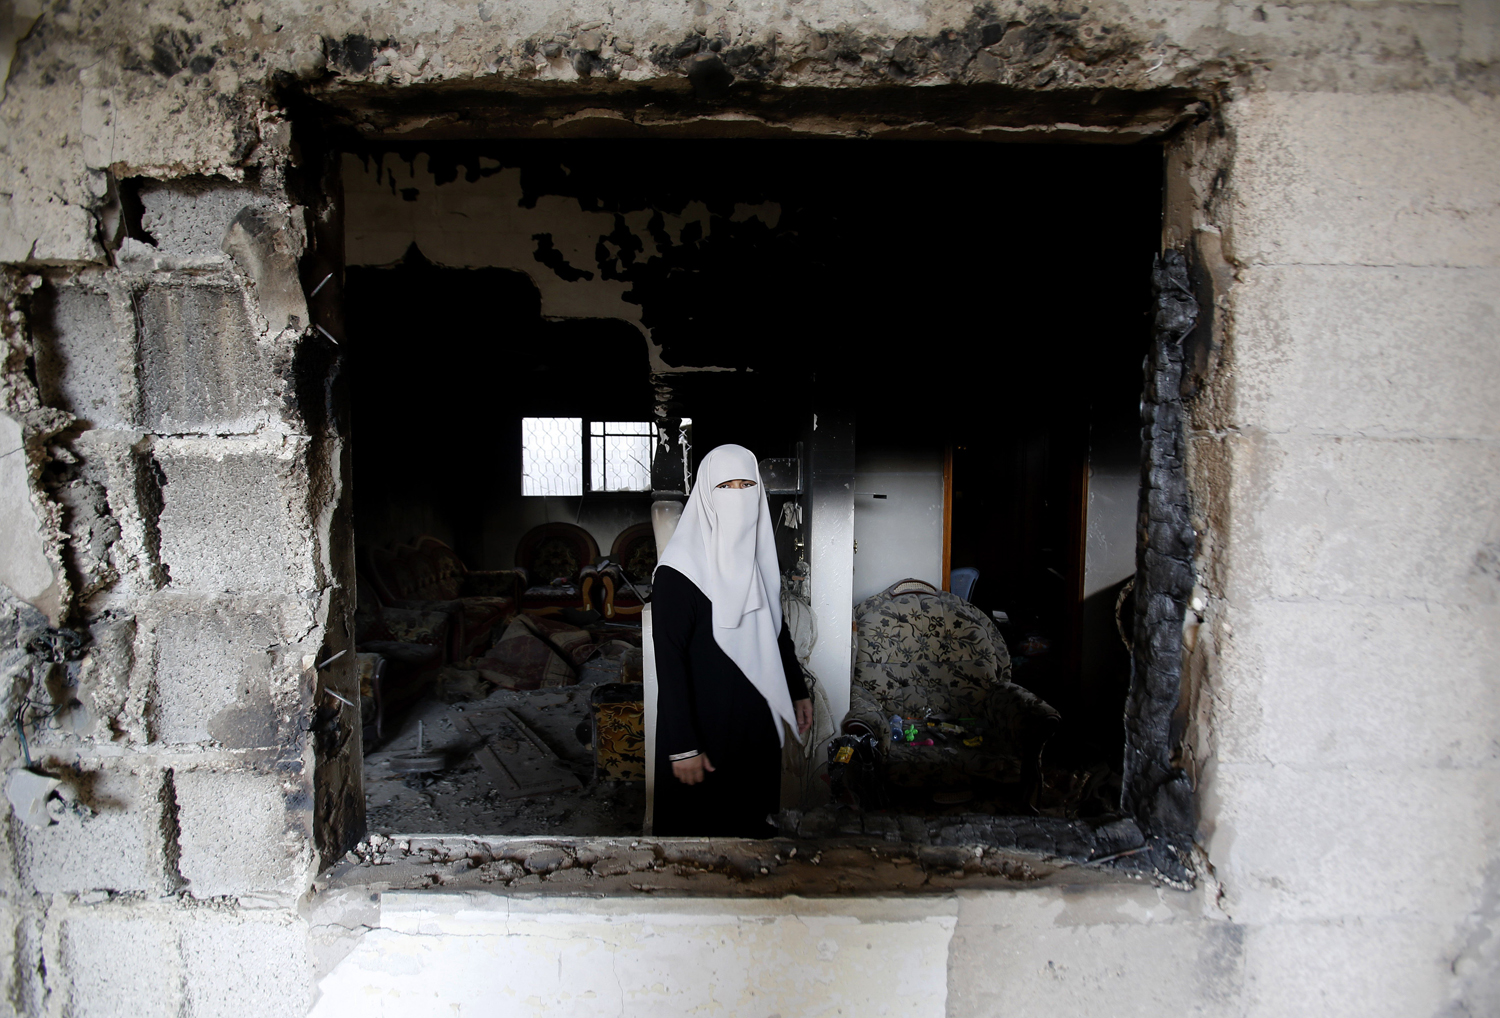 Aug. 11, 2014. A Palestinian woman stands in the rubble of her destroyed home in Gaza City's Shijaiyah neighborhood.